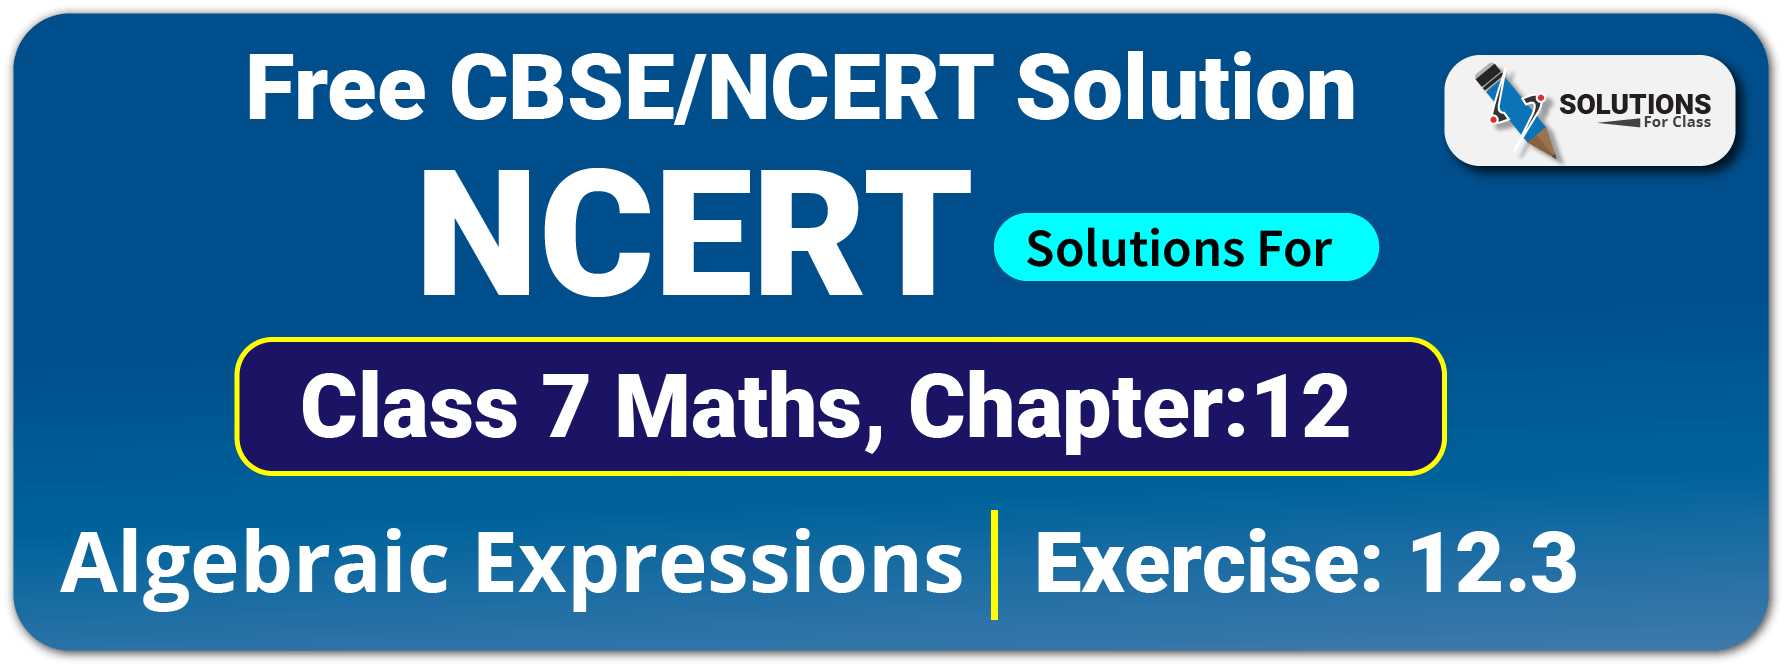 NCERT Solutions For Class 7 Maths Chapter 12 Algebraic Expressions Exercise 12.3